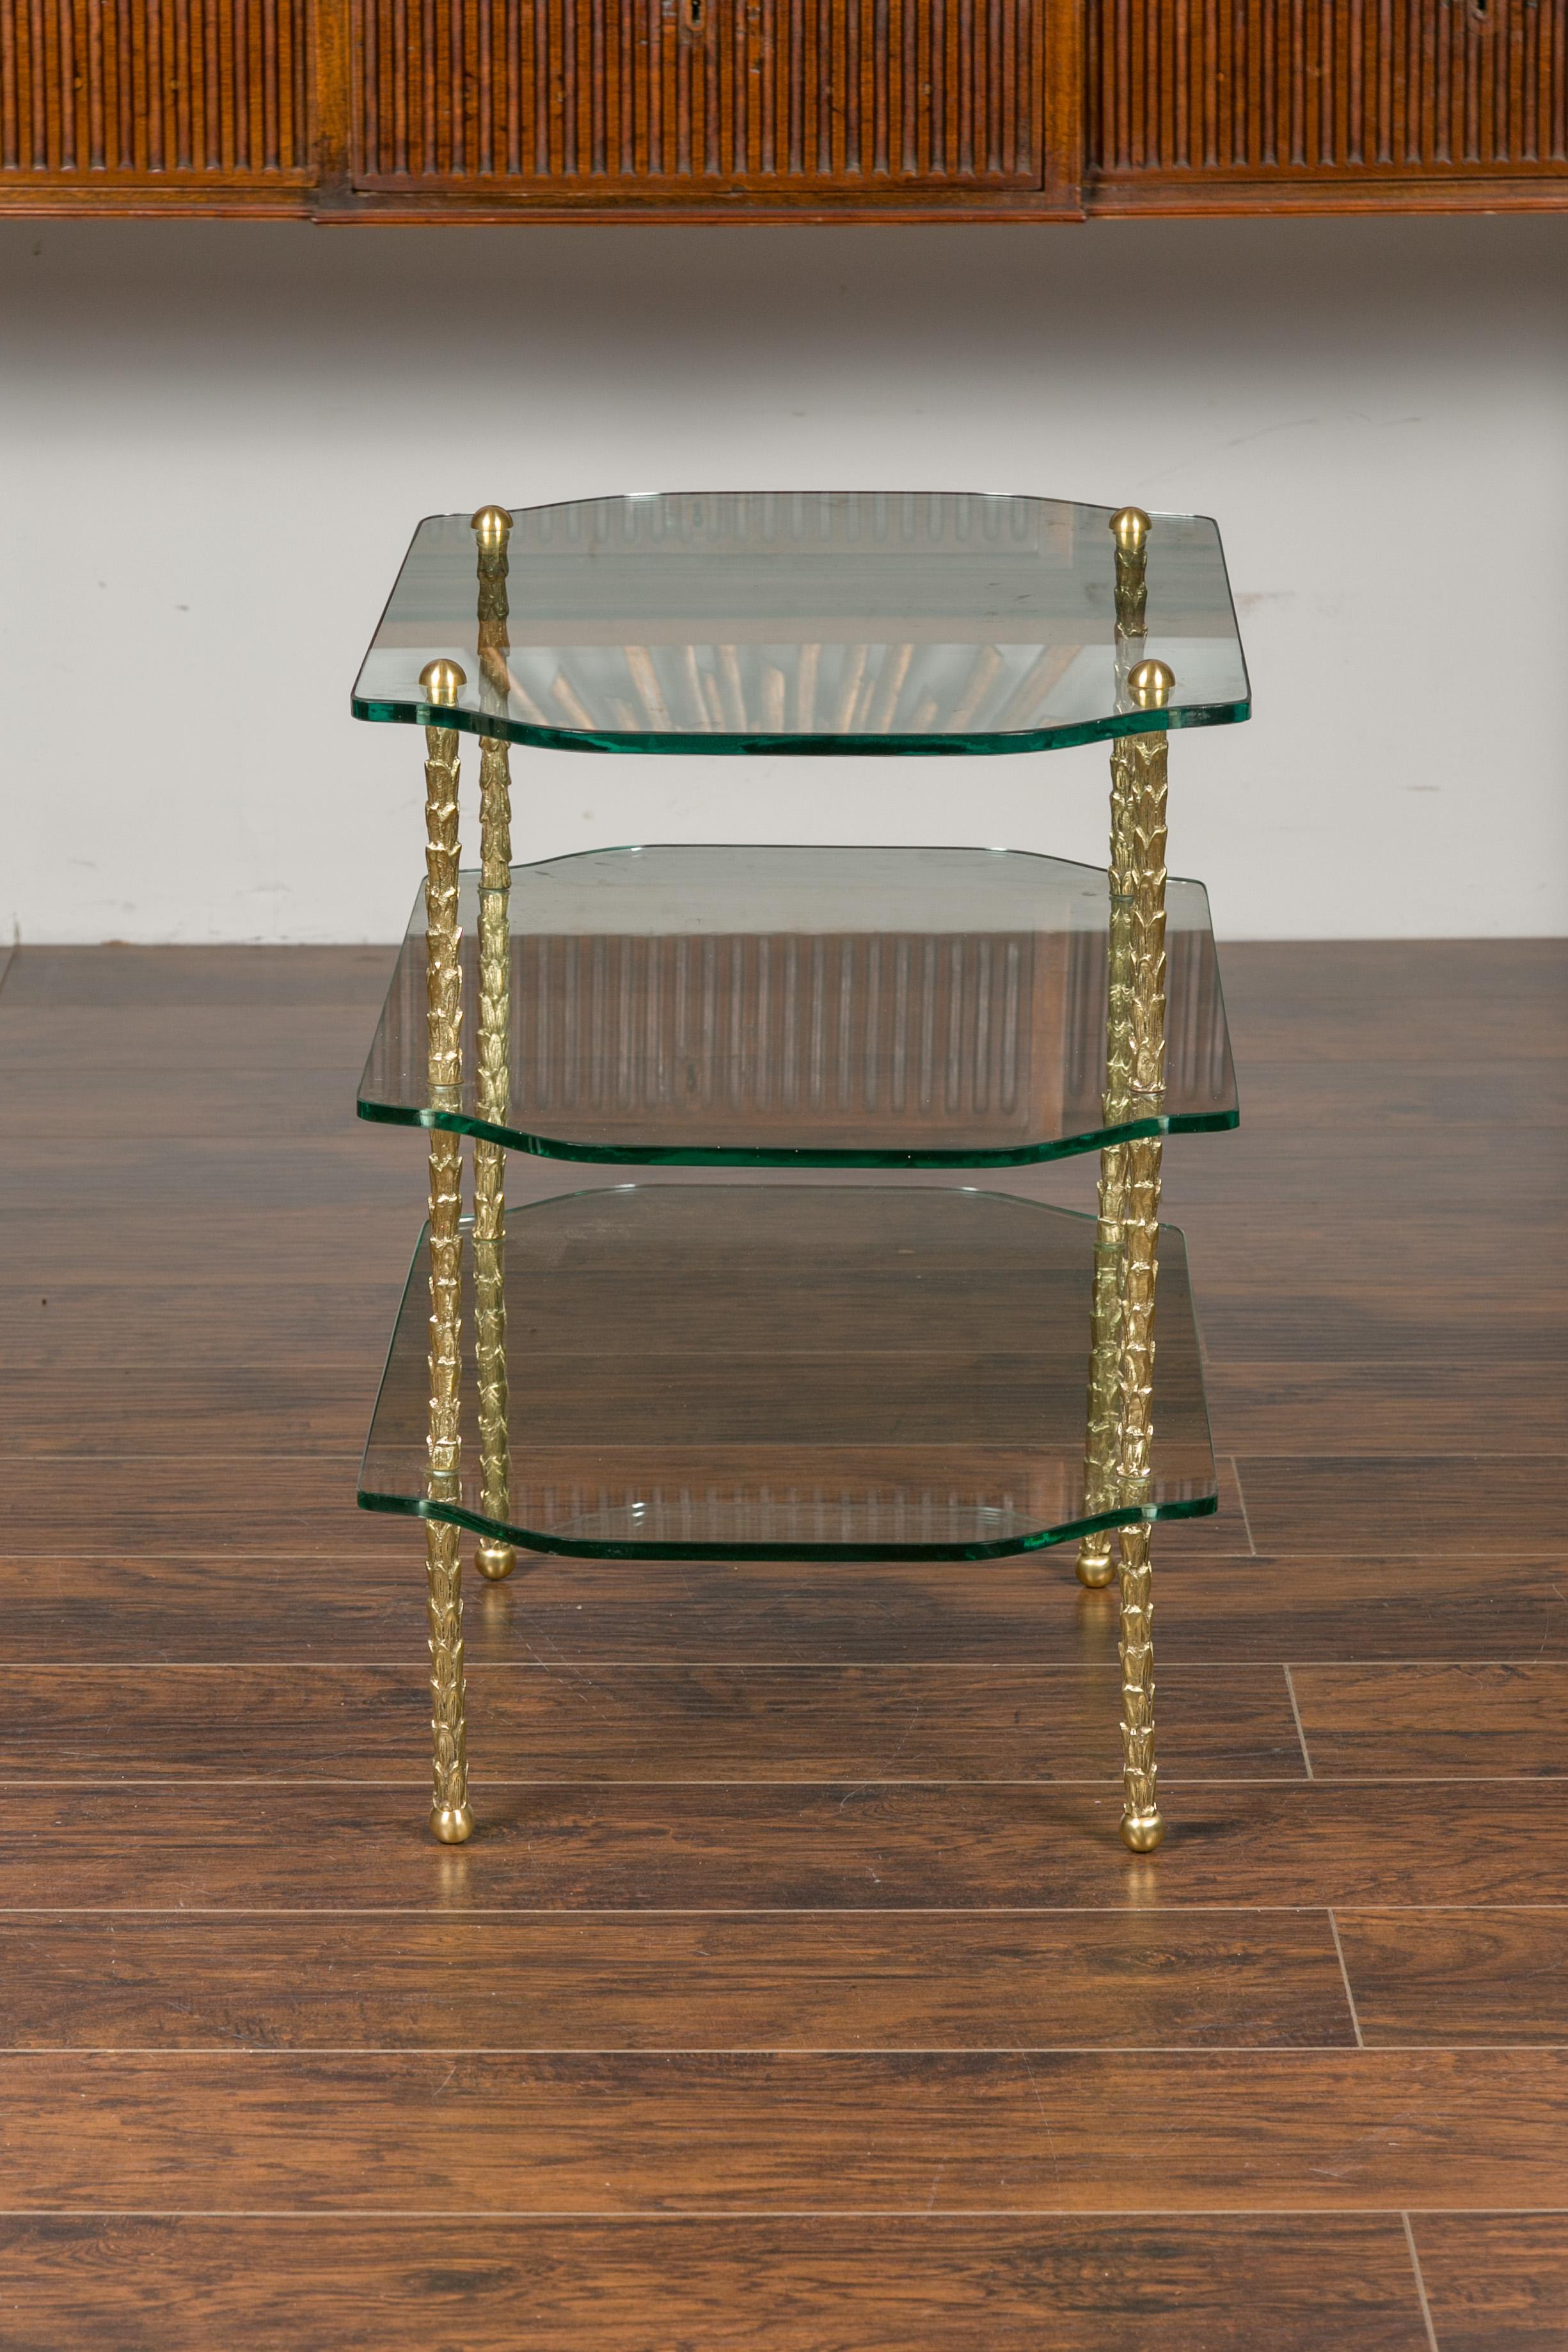 Midcentury Brass Three-Tiered Table with Glass Shelves and Foliage Motifs For Sale 6